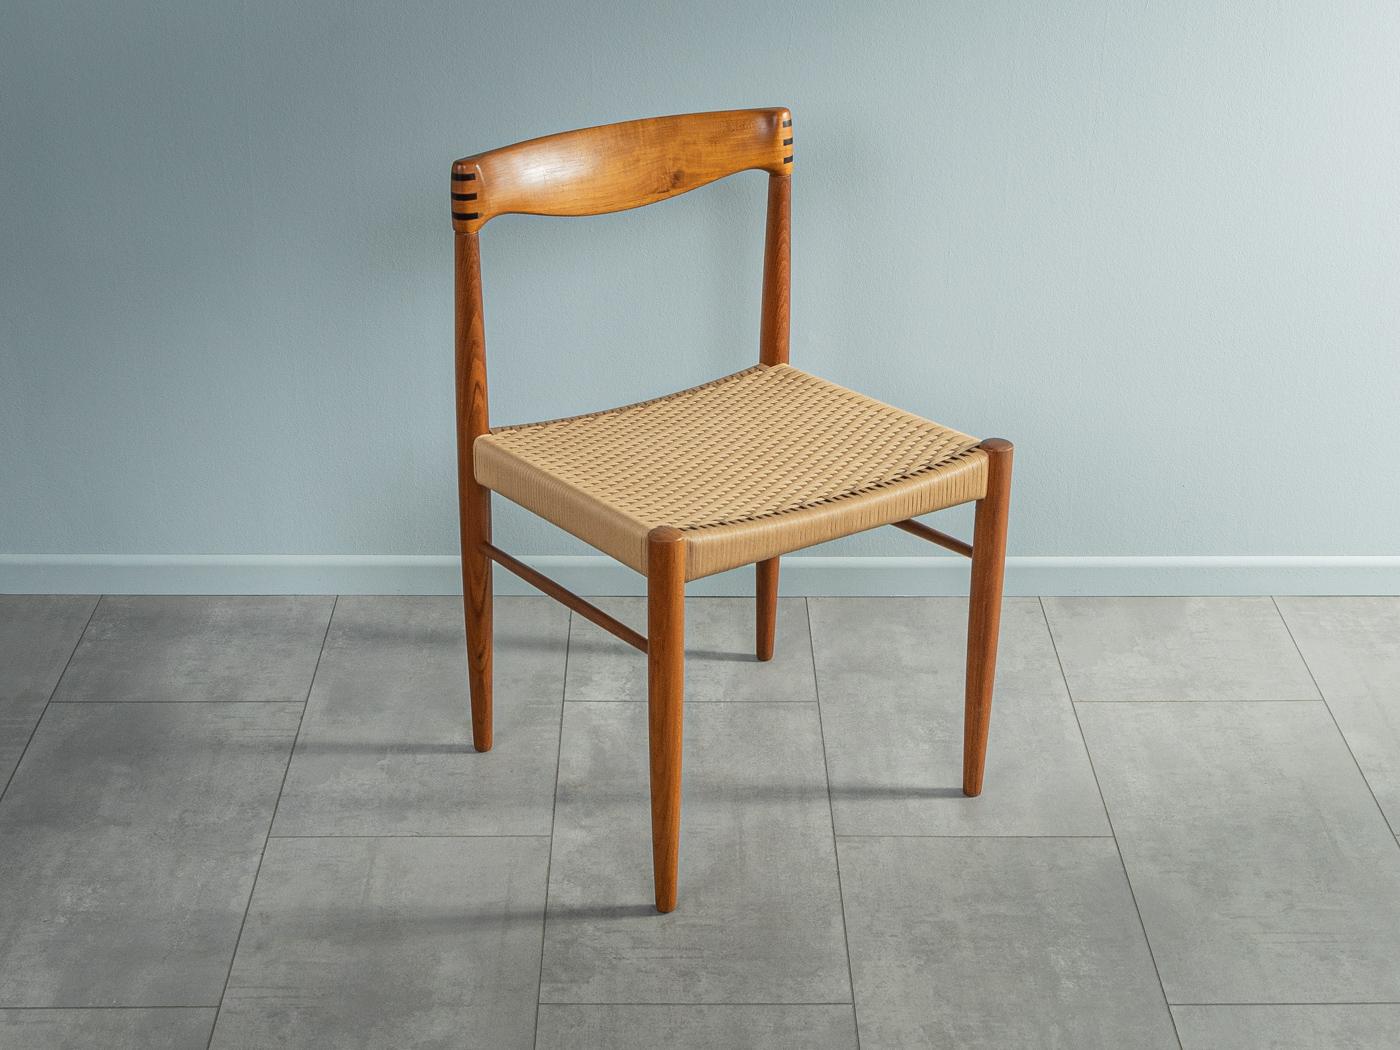 Rare dining chairs from the 1960s by H.W. Klein for Bramin with original paper cord weave. Solid teak frame with mortise & tenon backrest. The offer includes 4 chairs.
Quality features:

 Accomplished design: perfect proportions and visible